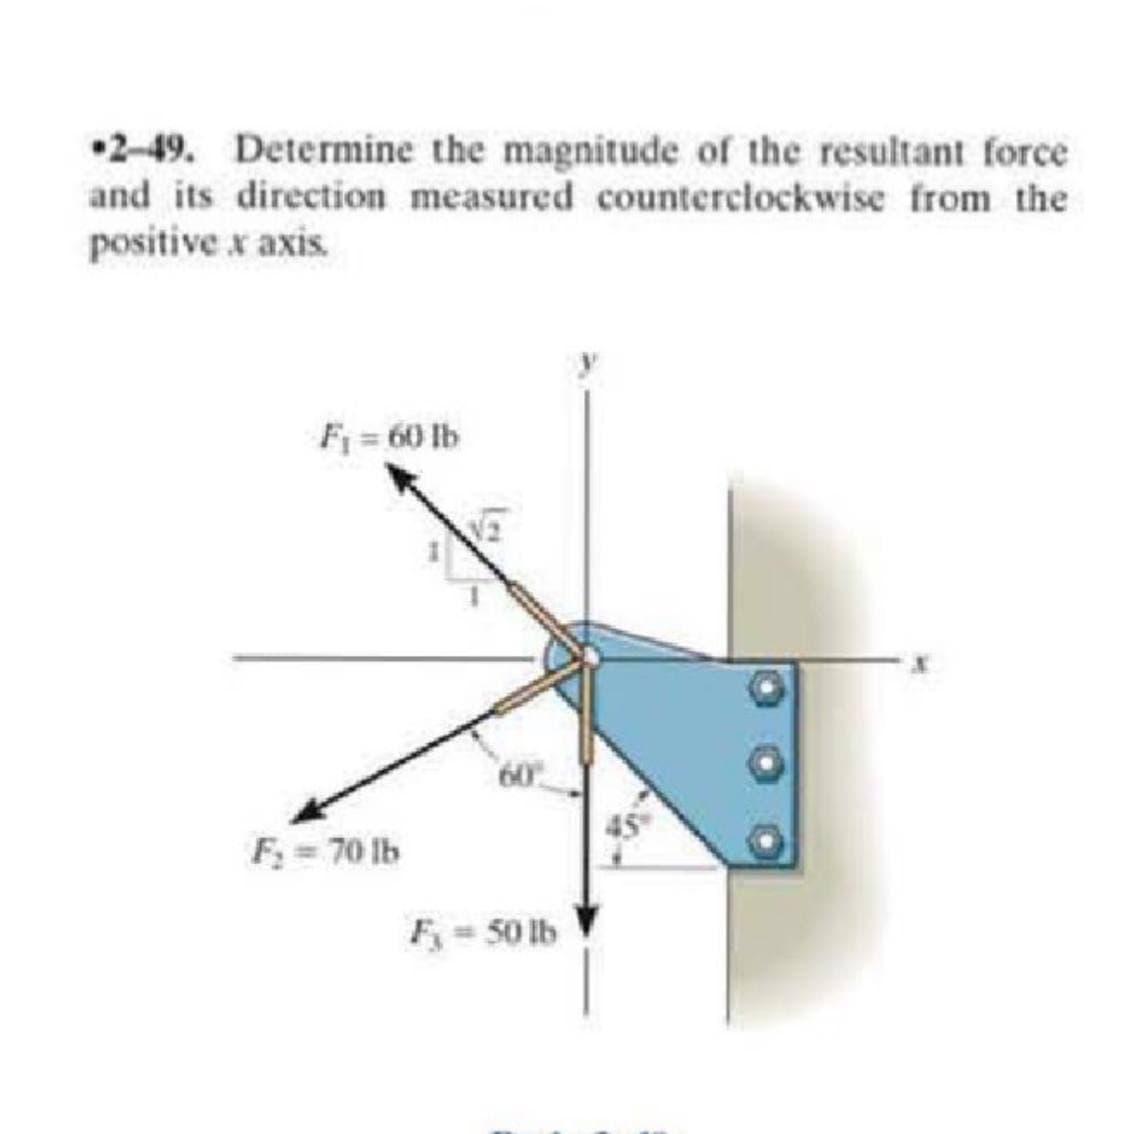 •2-49. Determine the magnitude of the resultant force
and its direction measured counterclockwise from the
positive x axis.
F = 60 lb
F; = 70 lb
F-50 lb
